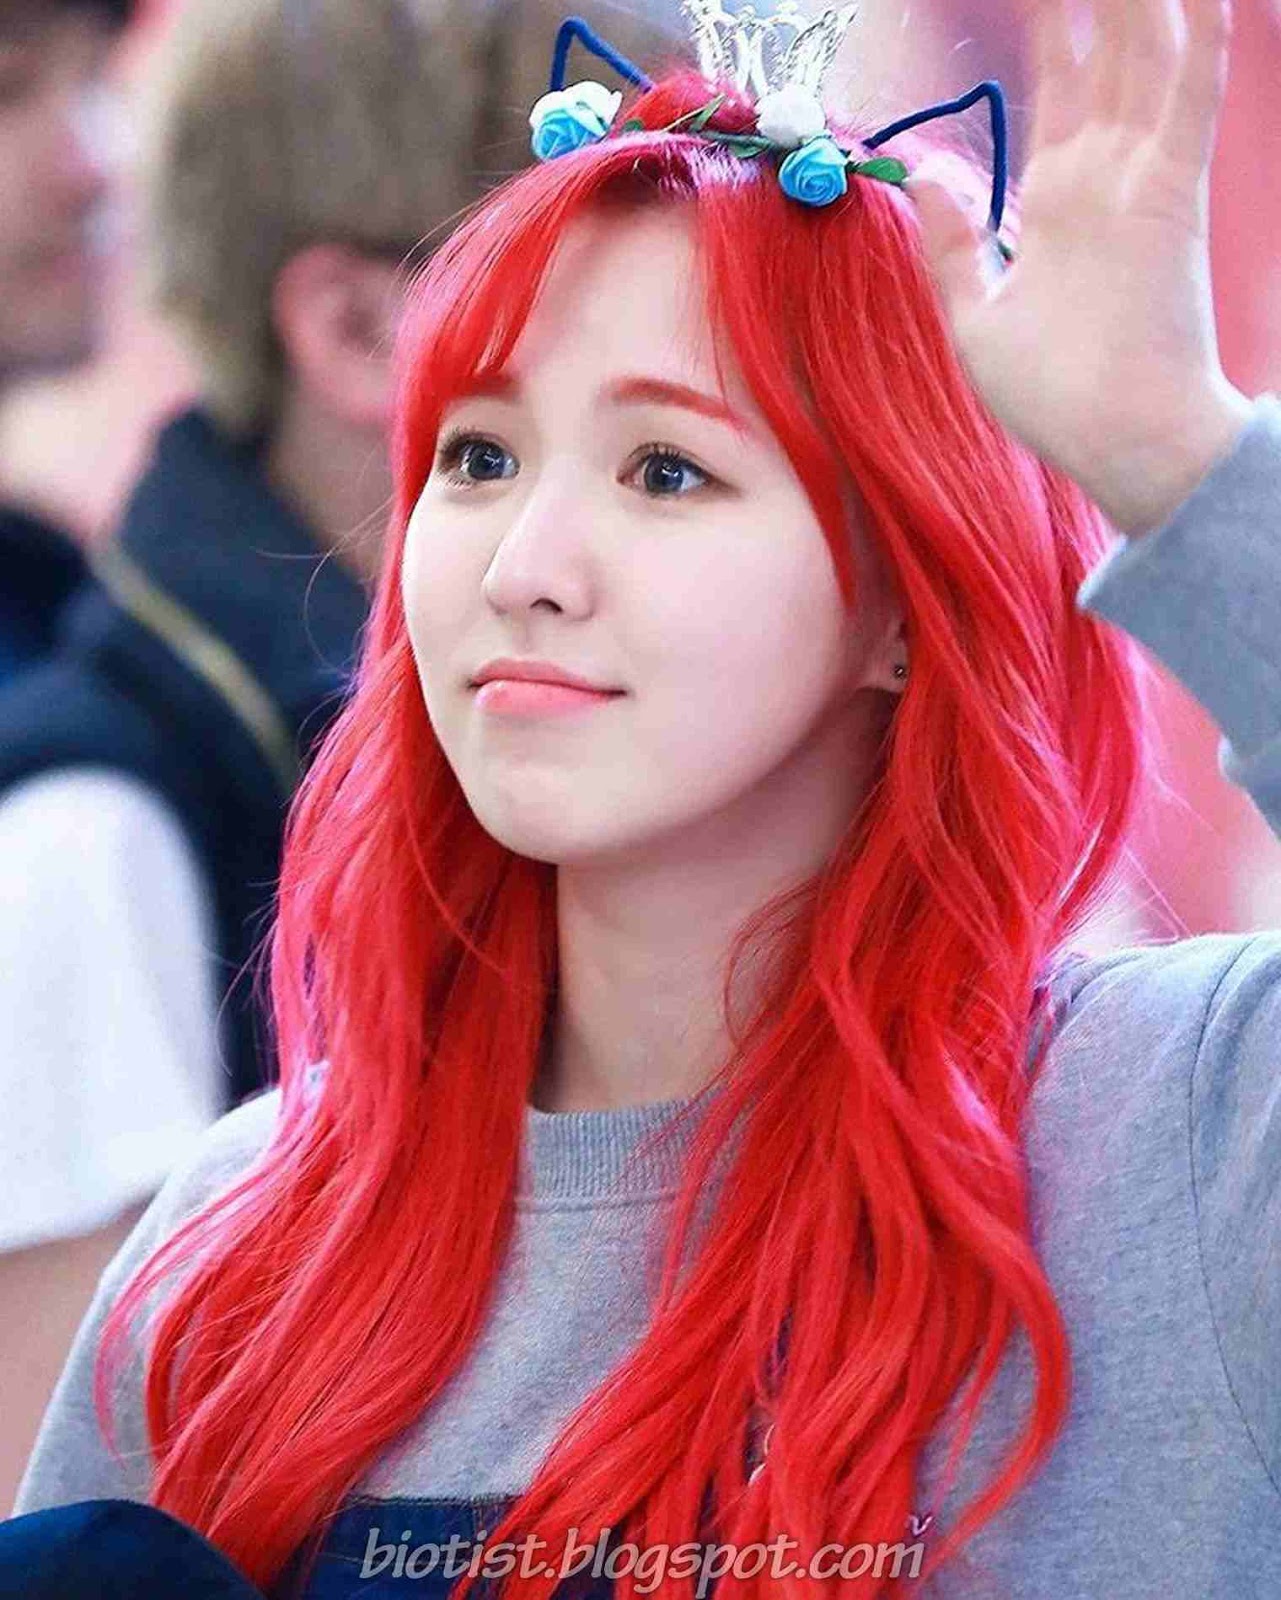 Red Velvet Wendy Cute Photos With Red Hairstyle.